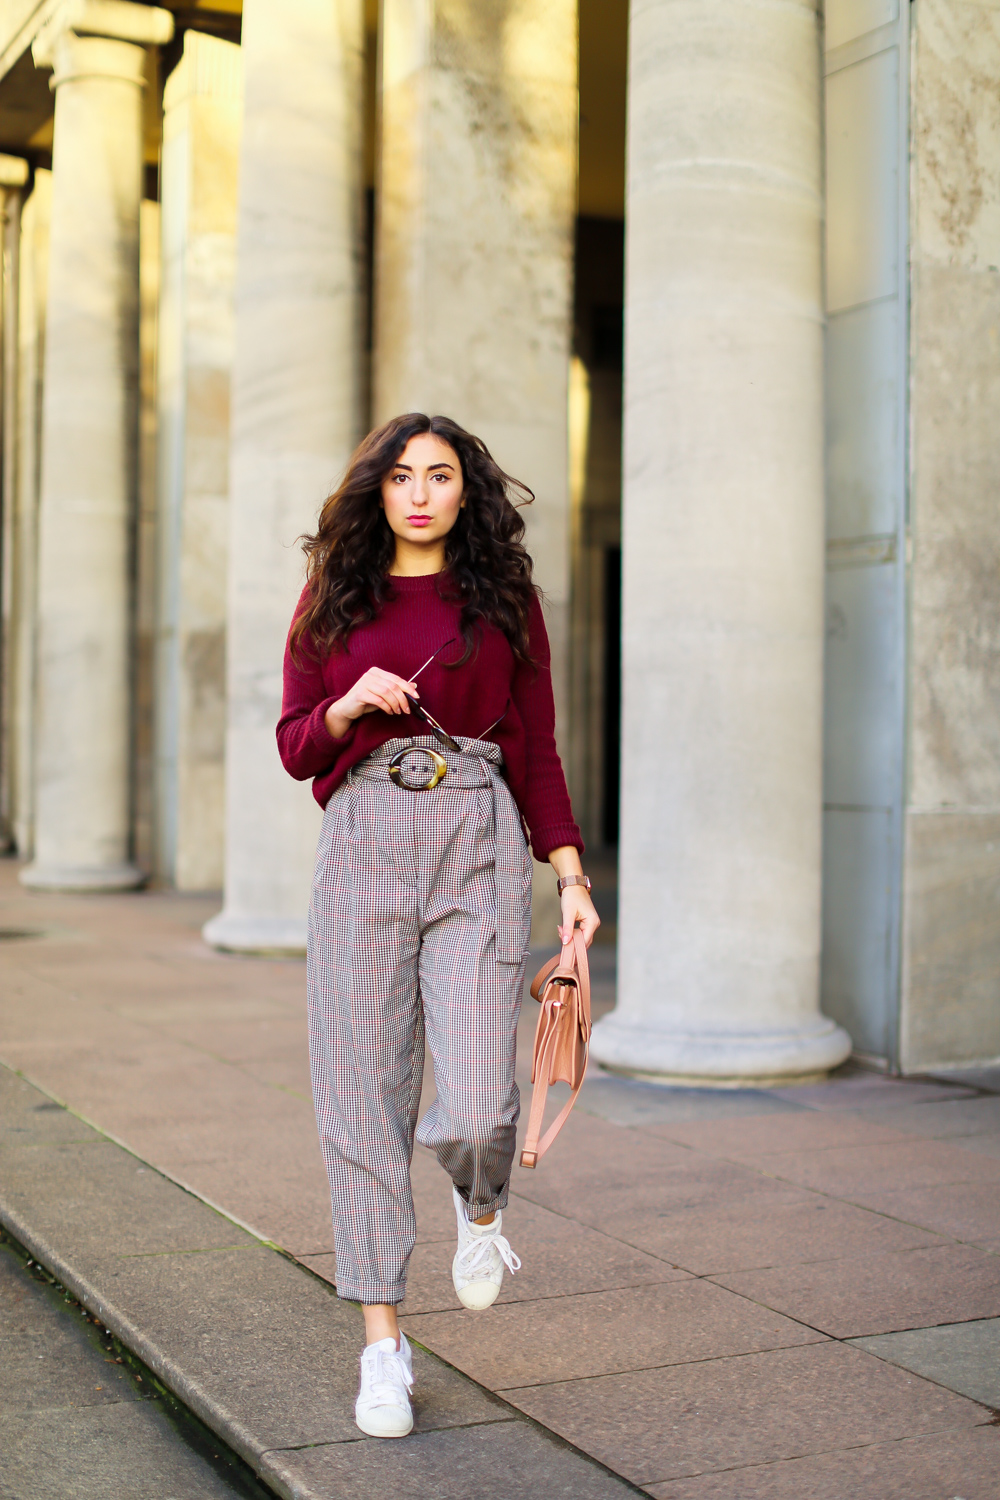 /home/samira/Desktop/Link to 2017/71_karohose/checkered pants/styling checkered pants paper back waist trausers mango winter outfit chic classic retro inspired herbst look streetstyle mode blog samieze berlin_.jpg /home/samira/Desktop/Link to 2017/71_karohose/checkered pants/styling checkered pants paper back waist trausers mango winter outfit chic classic retro inspired herbst look streetstyle mode blog samieze berlin_-2.jpg /home/samira/Desktop/Link to 2017/71_karohose/checkered pants/styling checkered pants paper back waist trausers mango winter outfit chic classic retro inspired herbst look streetstyle mode blog samieze berlin_-3.jpg /home/samira/Desktop/Link to 2017/71_karohose/checkered pants/styling checkered pants paper back waist trausers mango winter outfit chic classic retro inspired herbst look streetstyle mode blog samieze berlin_-4.jpg /home/samira/Desktop/Link to 2017/71_karohose/checkered pants/styling checkered pants paper back waist trausers mango winter outfit chic classic retro inspired herbst look streetstyle mode blog samieze berlin_-5.jpg /home/samira/Desktop/Link to 2017/71_karohose/checkered pants/styling checkered pants paper back waist trausers mango winter outfit chic classic retro inspired herbst look streetstyle mode blog samieze berlin_-6.jpg /home/samira/Desktop/Link to 2017/71_karohose/checkered pants/styling checkered pants paper back waist trausers mango winter outfit chic classic retro inspired herbst look streetstyle mode blog samieze berlin_-7.jpg /home/samira/Desktop/Link to 2017/71_karohose/checkered pants/styling checkered pants paper back waist trausers mango winter outfit chic classic retro inspired herbst look streetstyle mode blog samieze berlin_-8.jpg /home/samira/Desktop/Link to 2017/71_karohose/checkered pants/styling checkered pants paper back waist trausers mango winter outfit chic classic retro inspired herbst look streetstyle mode blog samieze berlin_-9.jpg /home/samira/Desktop/Link to 2017/71_karohose/checkered pants/styling checkered pants paper back waist trausers mango winter outfit chic classic retro inspired herbst look streetstyle mode blog samieze berlin_-10.jpg /home/samira/Desktop/Link to 2017/71_karohose/checkered pants/styling checkered pants paper back waist trausers mango winter outfit chic classic retro inspired herbst look streetstyle mode blog samieze berlin_-11.jpg